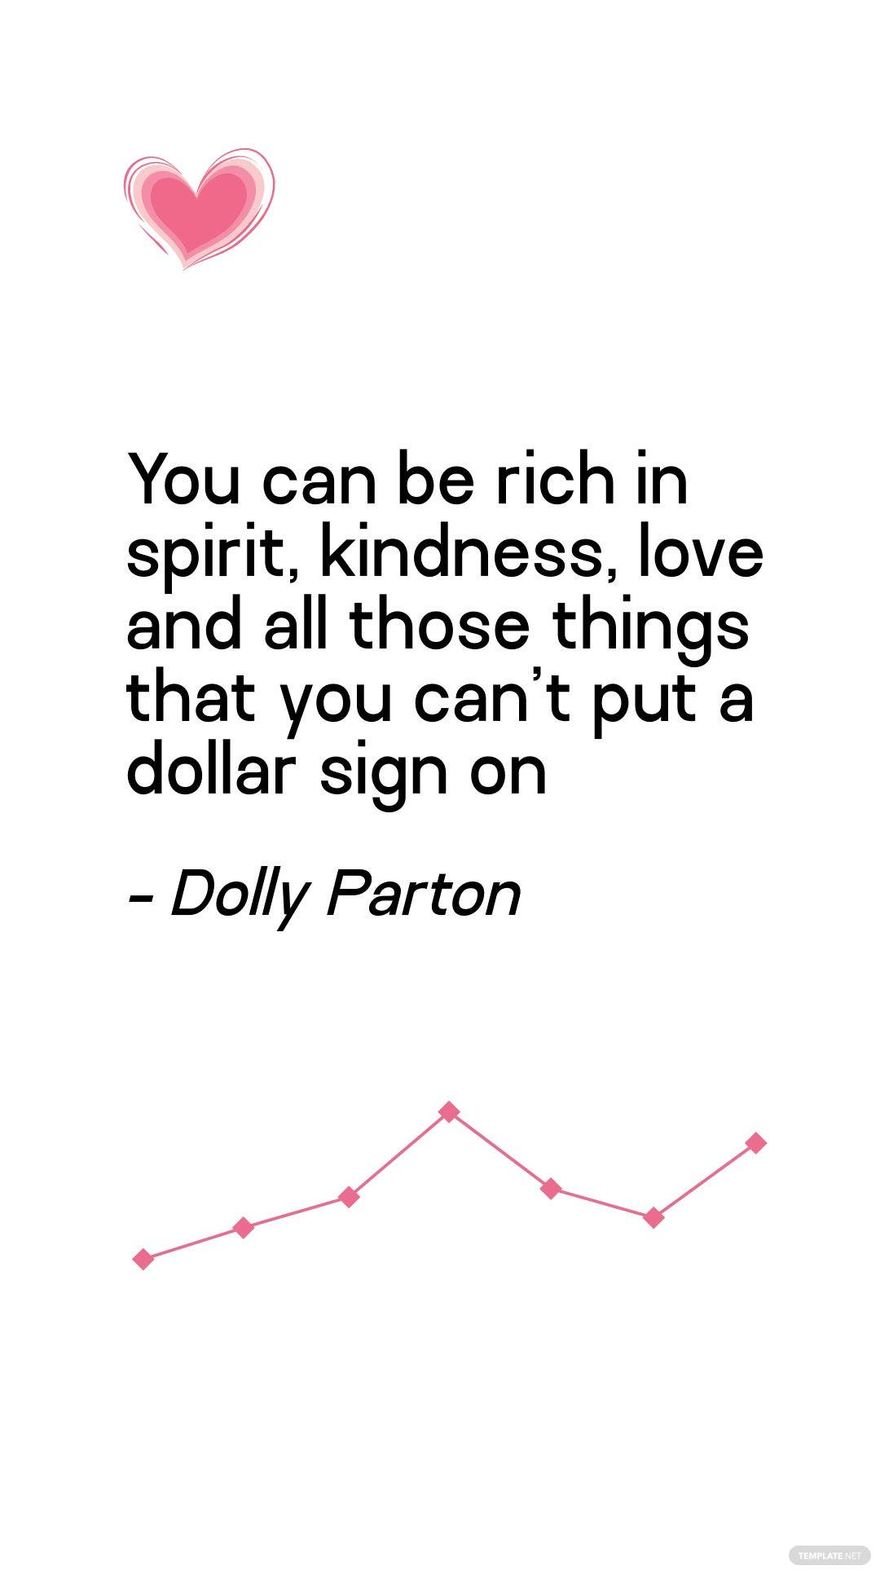 Dolly Parton - You can be rich in spirit, kindness, love and all those things that you can't put a dollar sign on